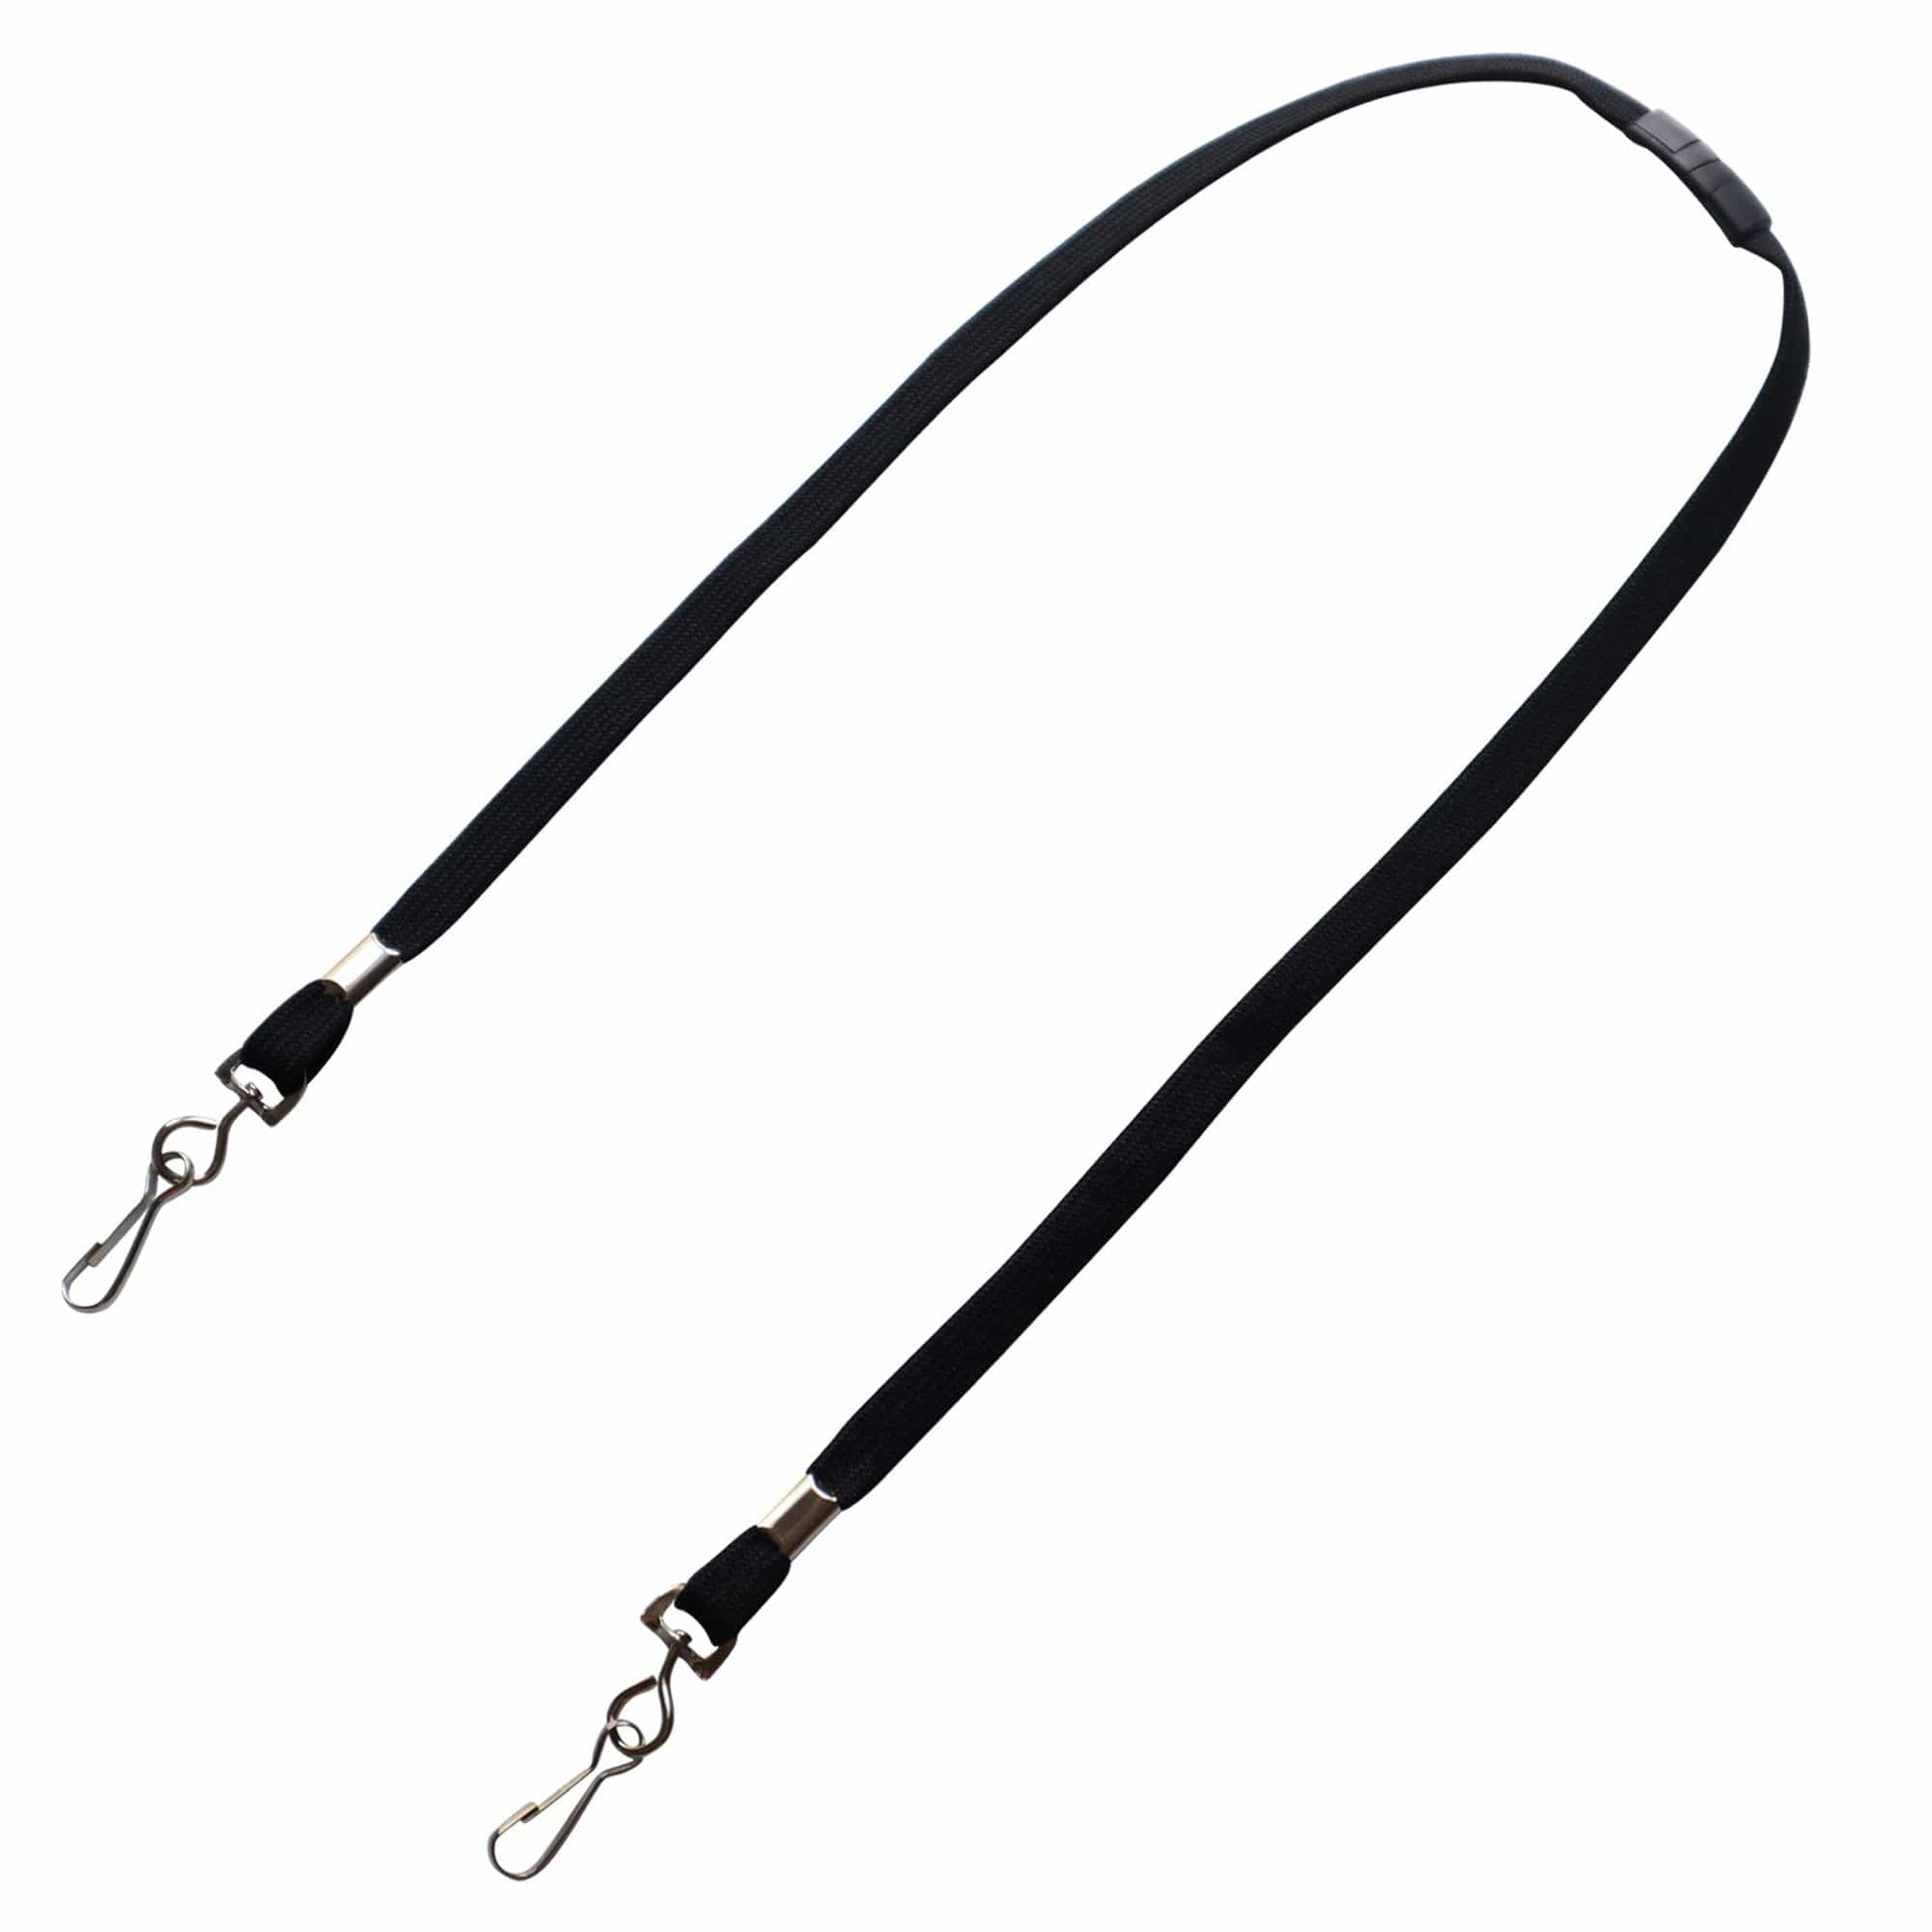 Kids Face Mask Lanyard / Hanger with Safety Breakaway Clasp - Short Length for Childrens Facemasks